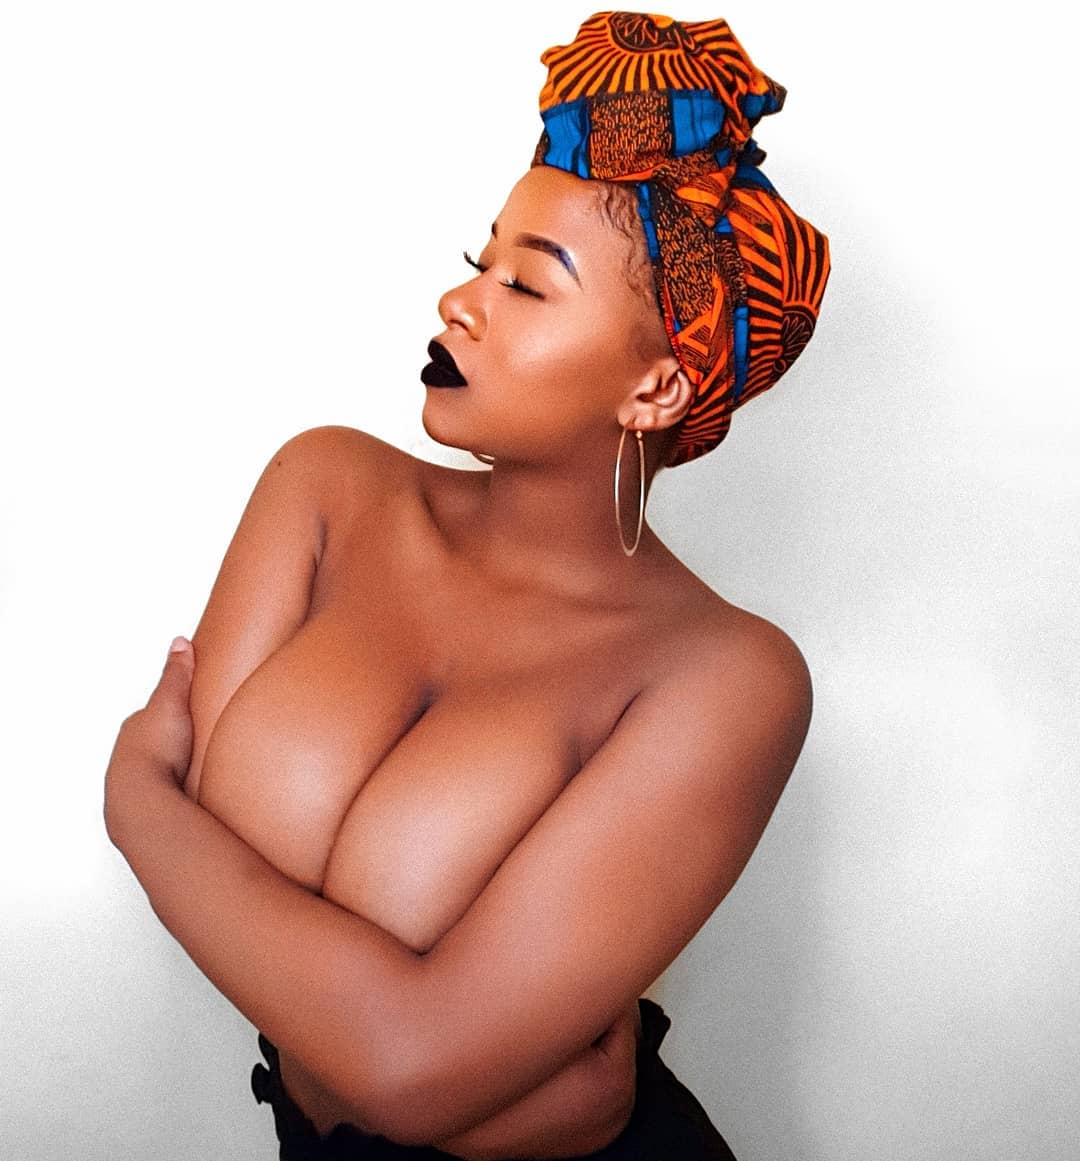 Abby Chioma has taken to her Instagram page to share a bawdy photo of herse...